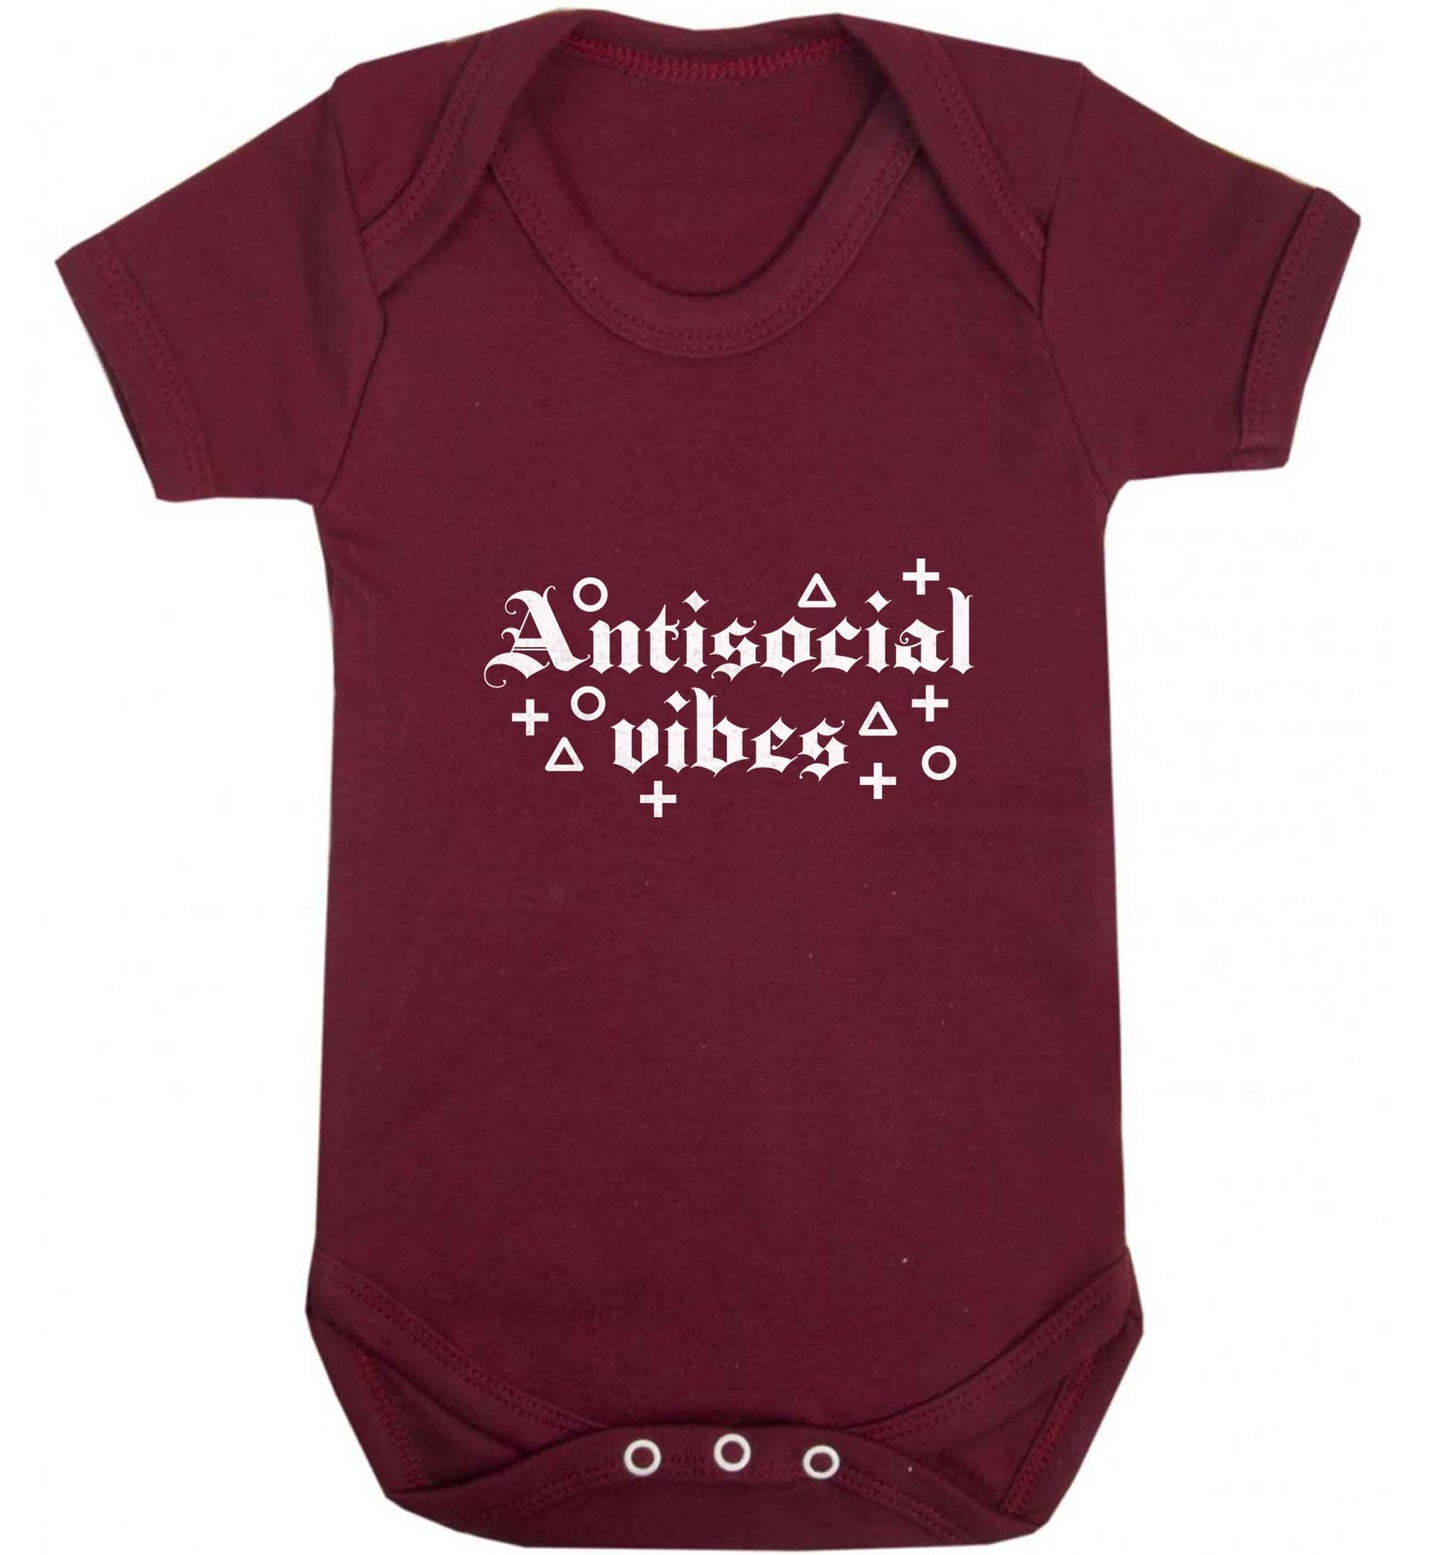 Antisocial vibes baby vest maroon 18-24 months